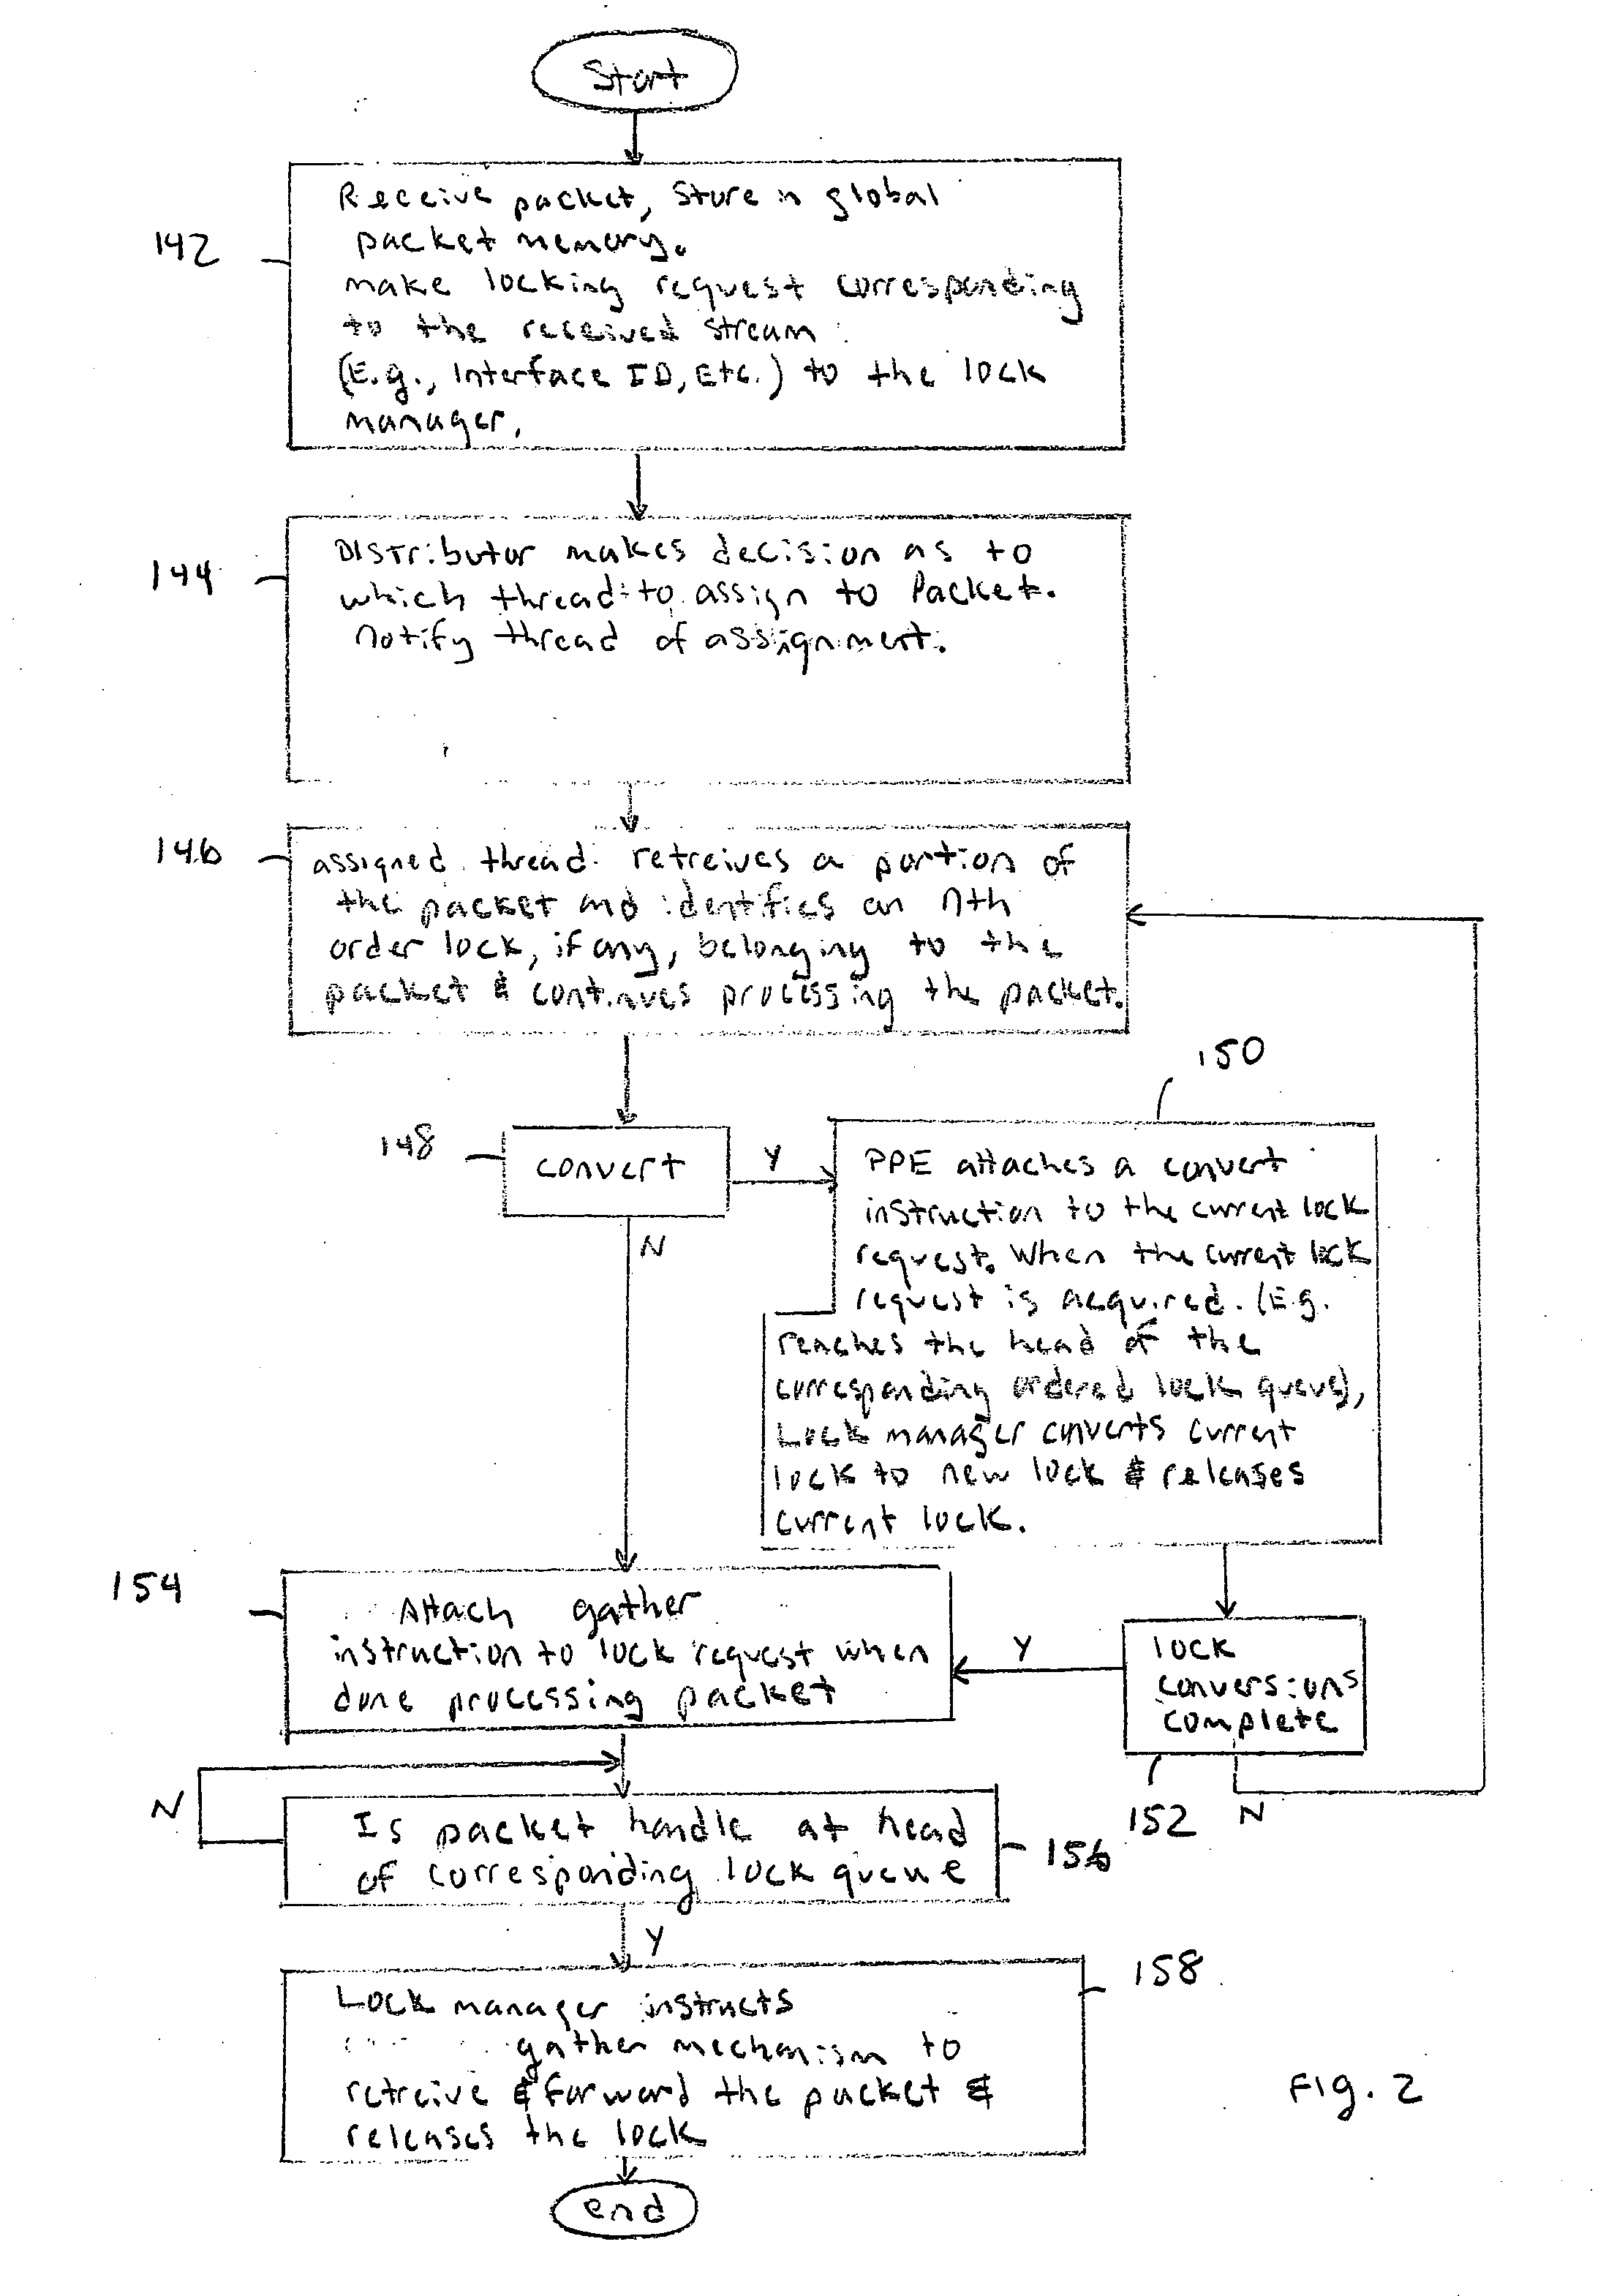 Multi-threaded packeting processing architecture